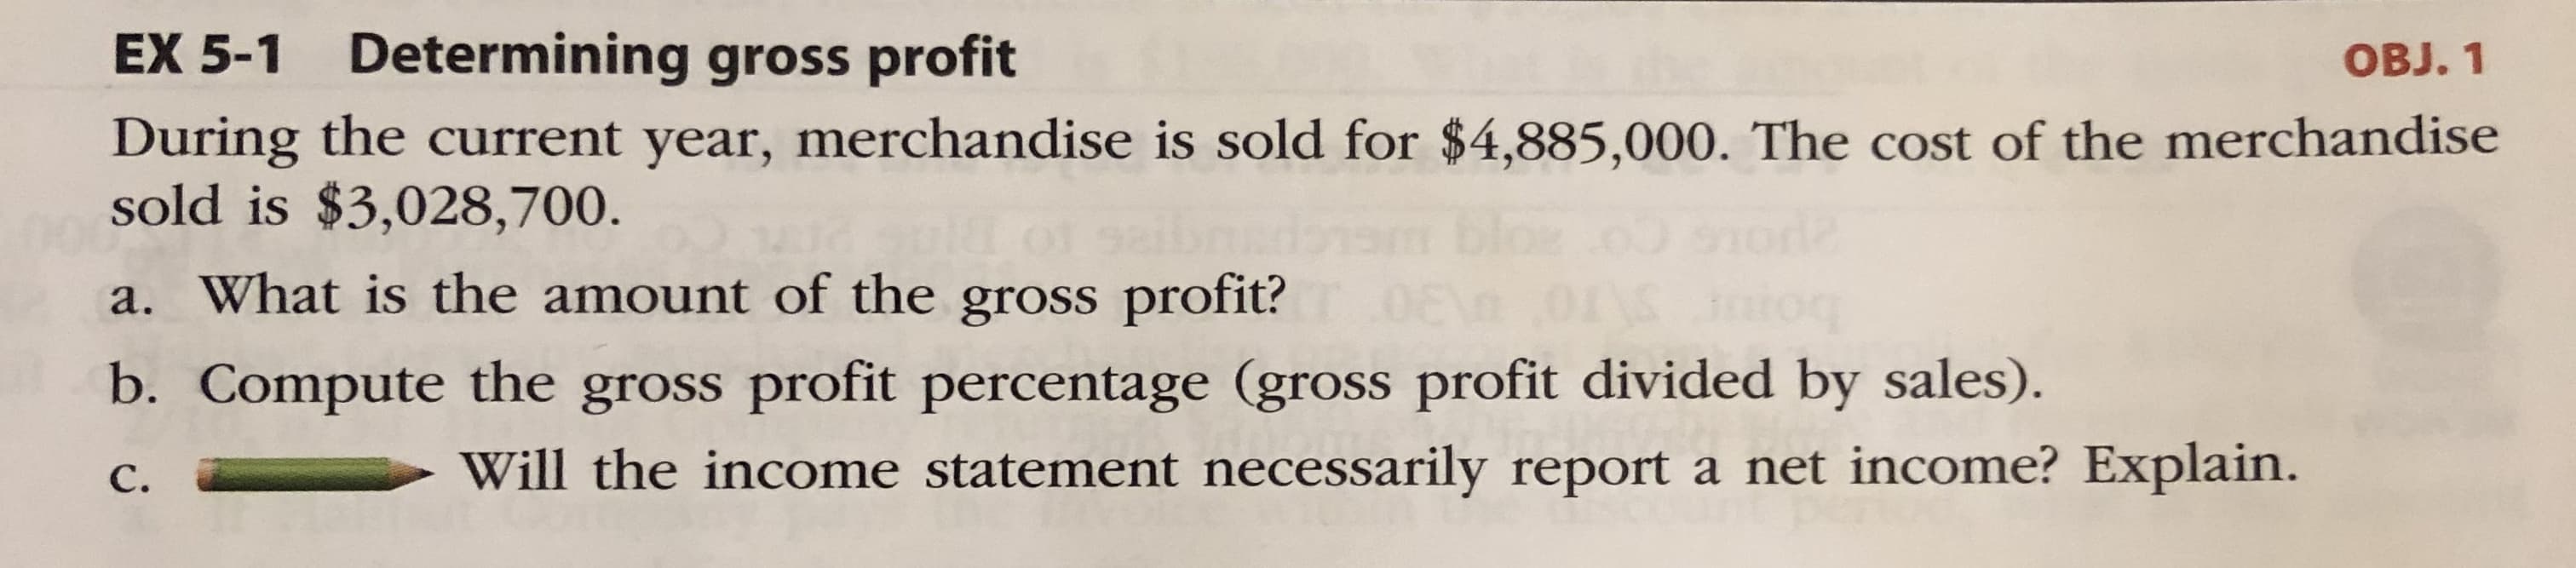 EX 5-1 Determining gross profit
ОB. 1
During the current year, merchandise is sold for $4,885,000. The cost of the merchandise
sold is $3,028,700.
a. What is the amount of the gross profit?
b. Compute the gross profit percentage (gross profit divided by sales).
С.
Will the income statement necessarily report a net income? Explain.
